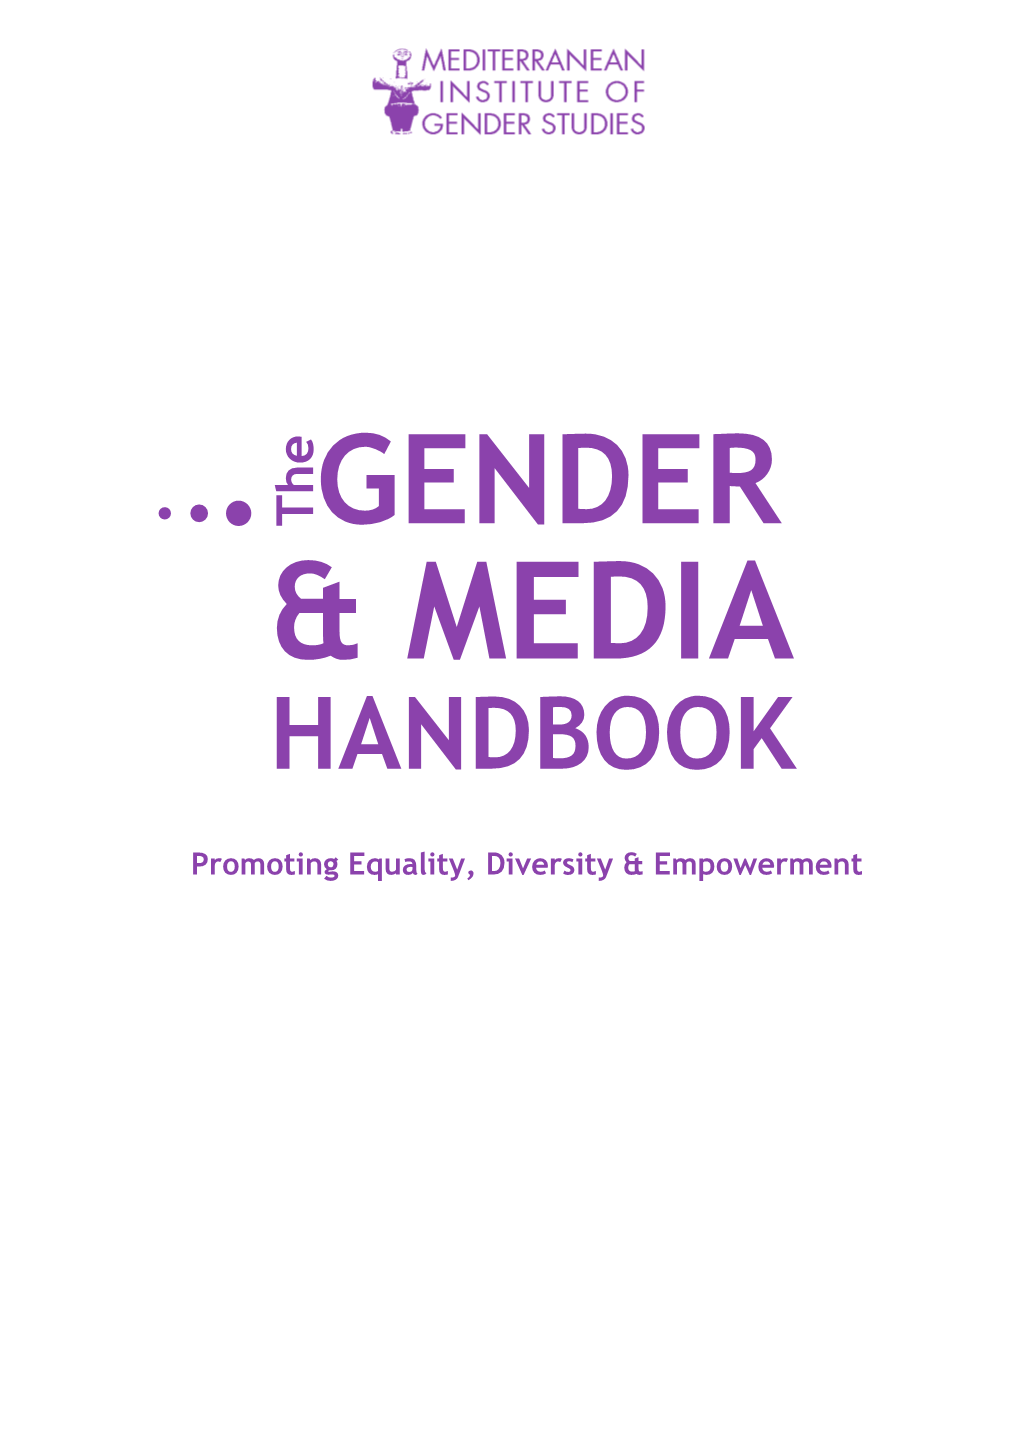 Gender and Media Handbook Is an Important and Much Welcomed Addition to Worldwide Efforts to Promote Gender Equality and Diversity in and Through the Media